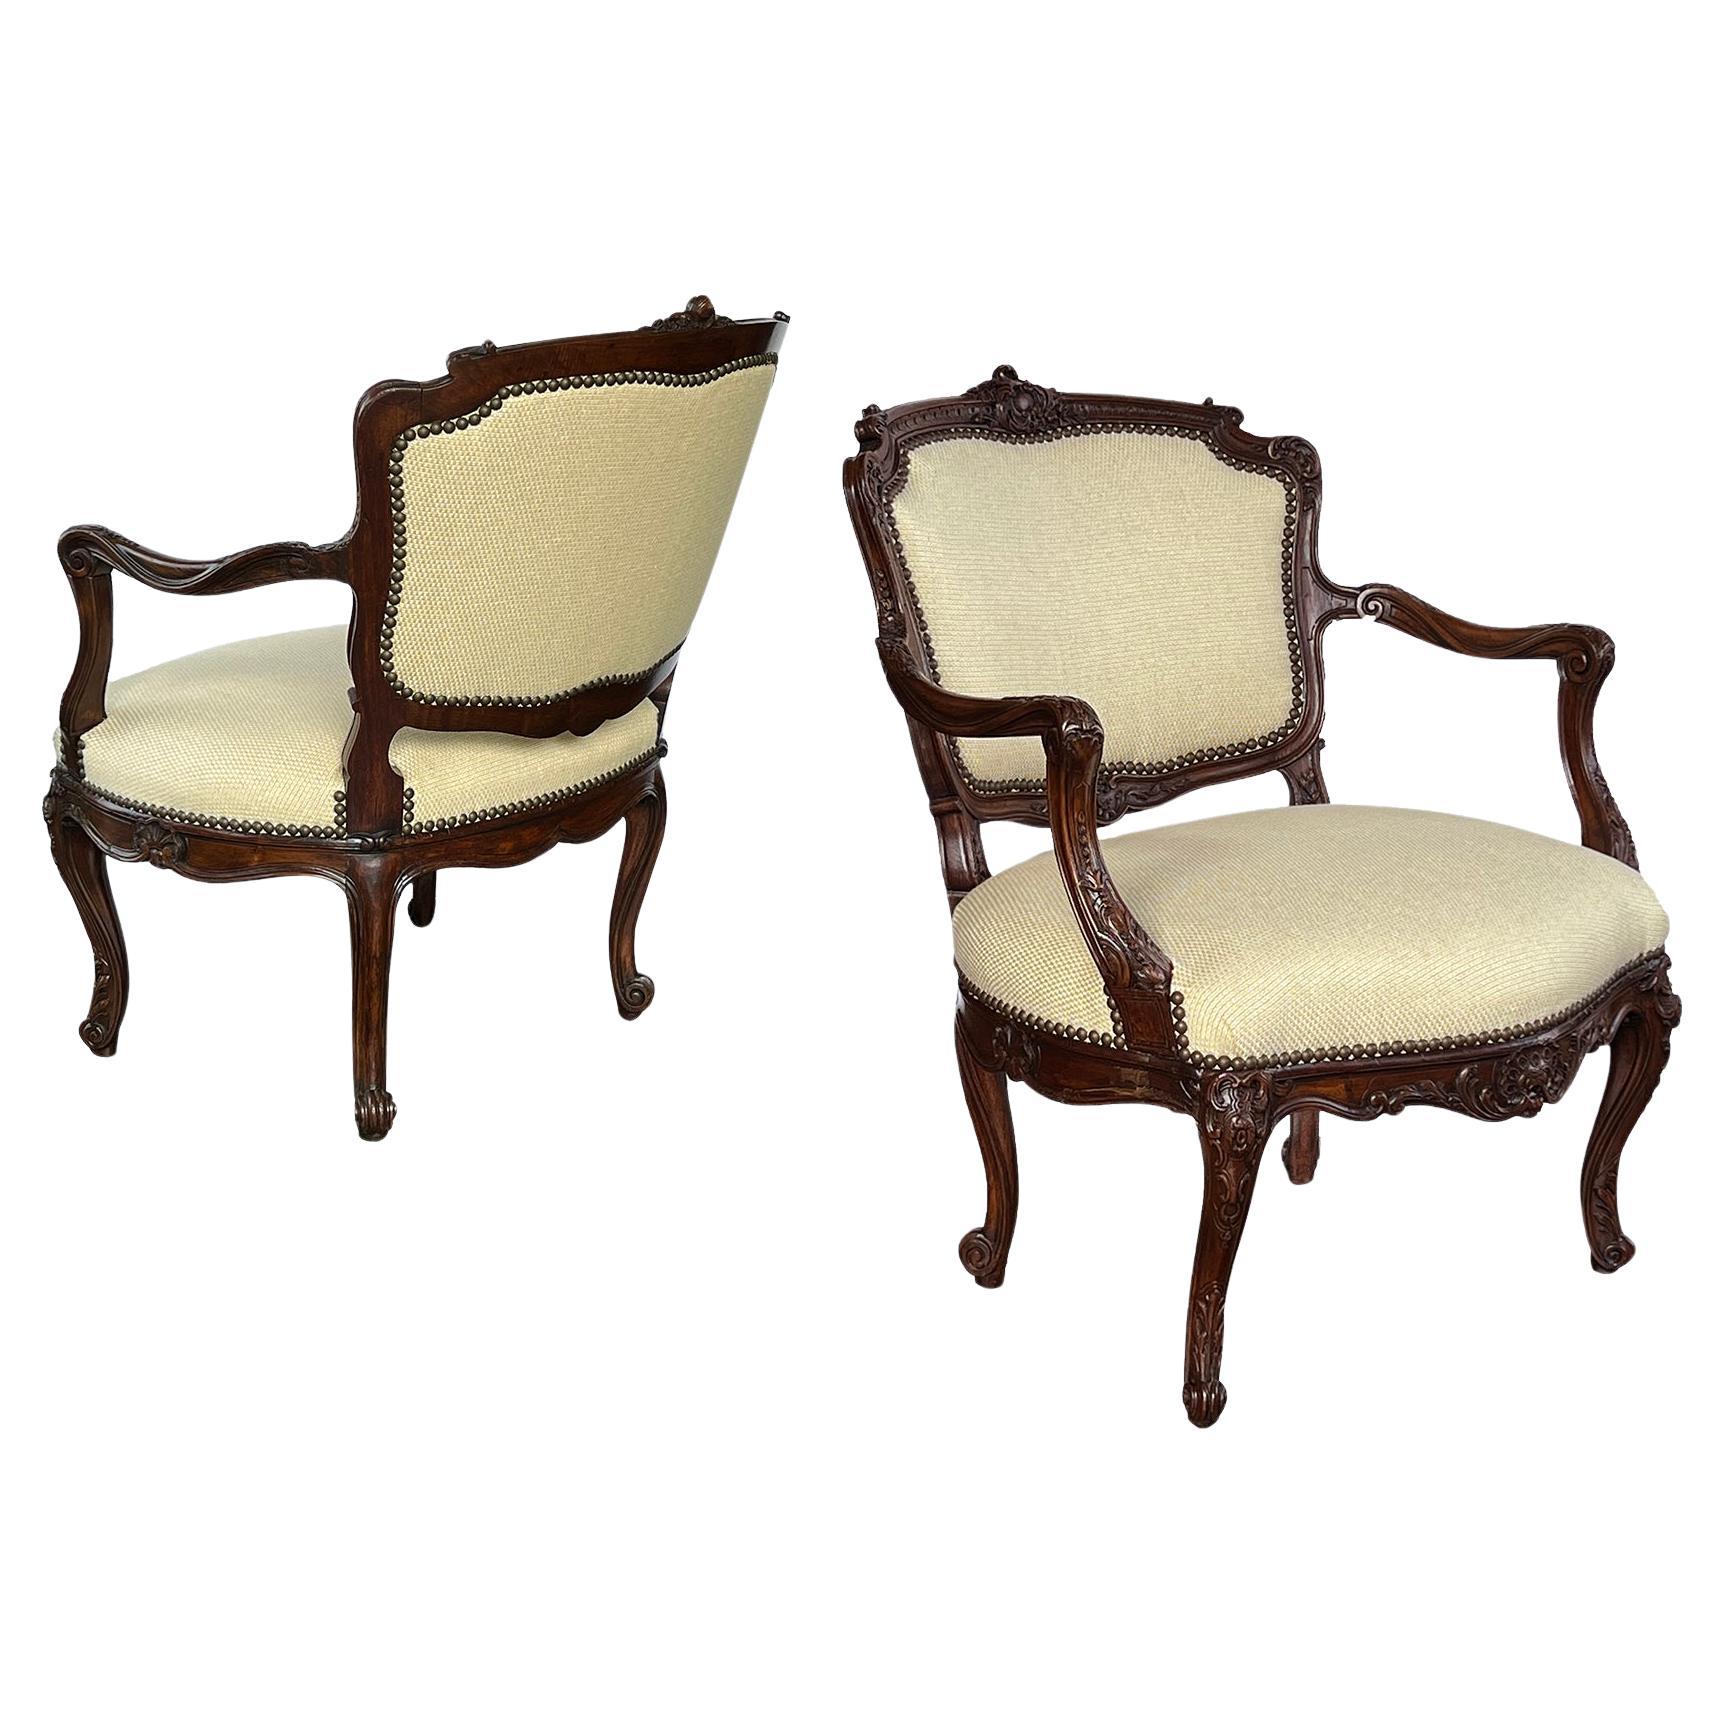 A 19th Century Pair French Rococo Style Carved Open Arm Chairs